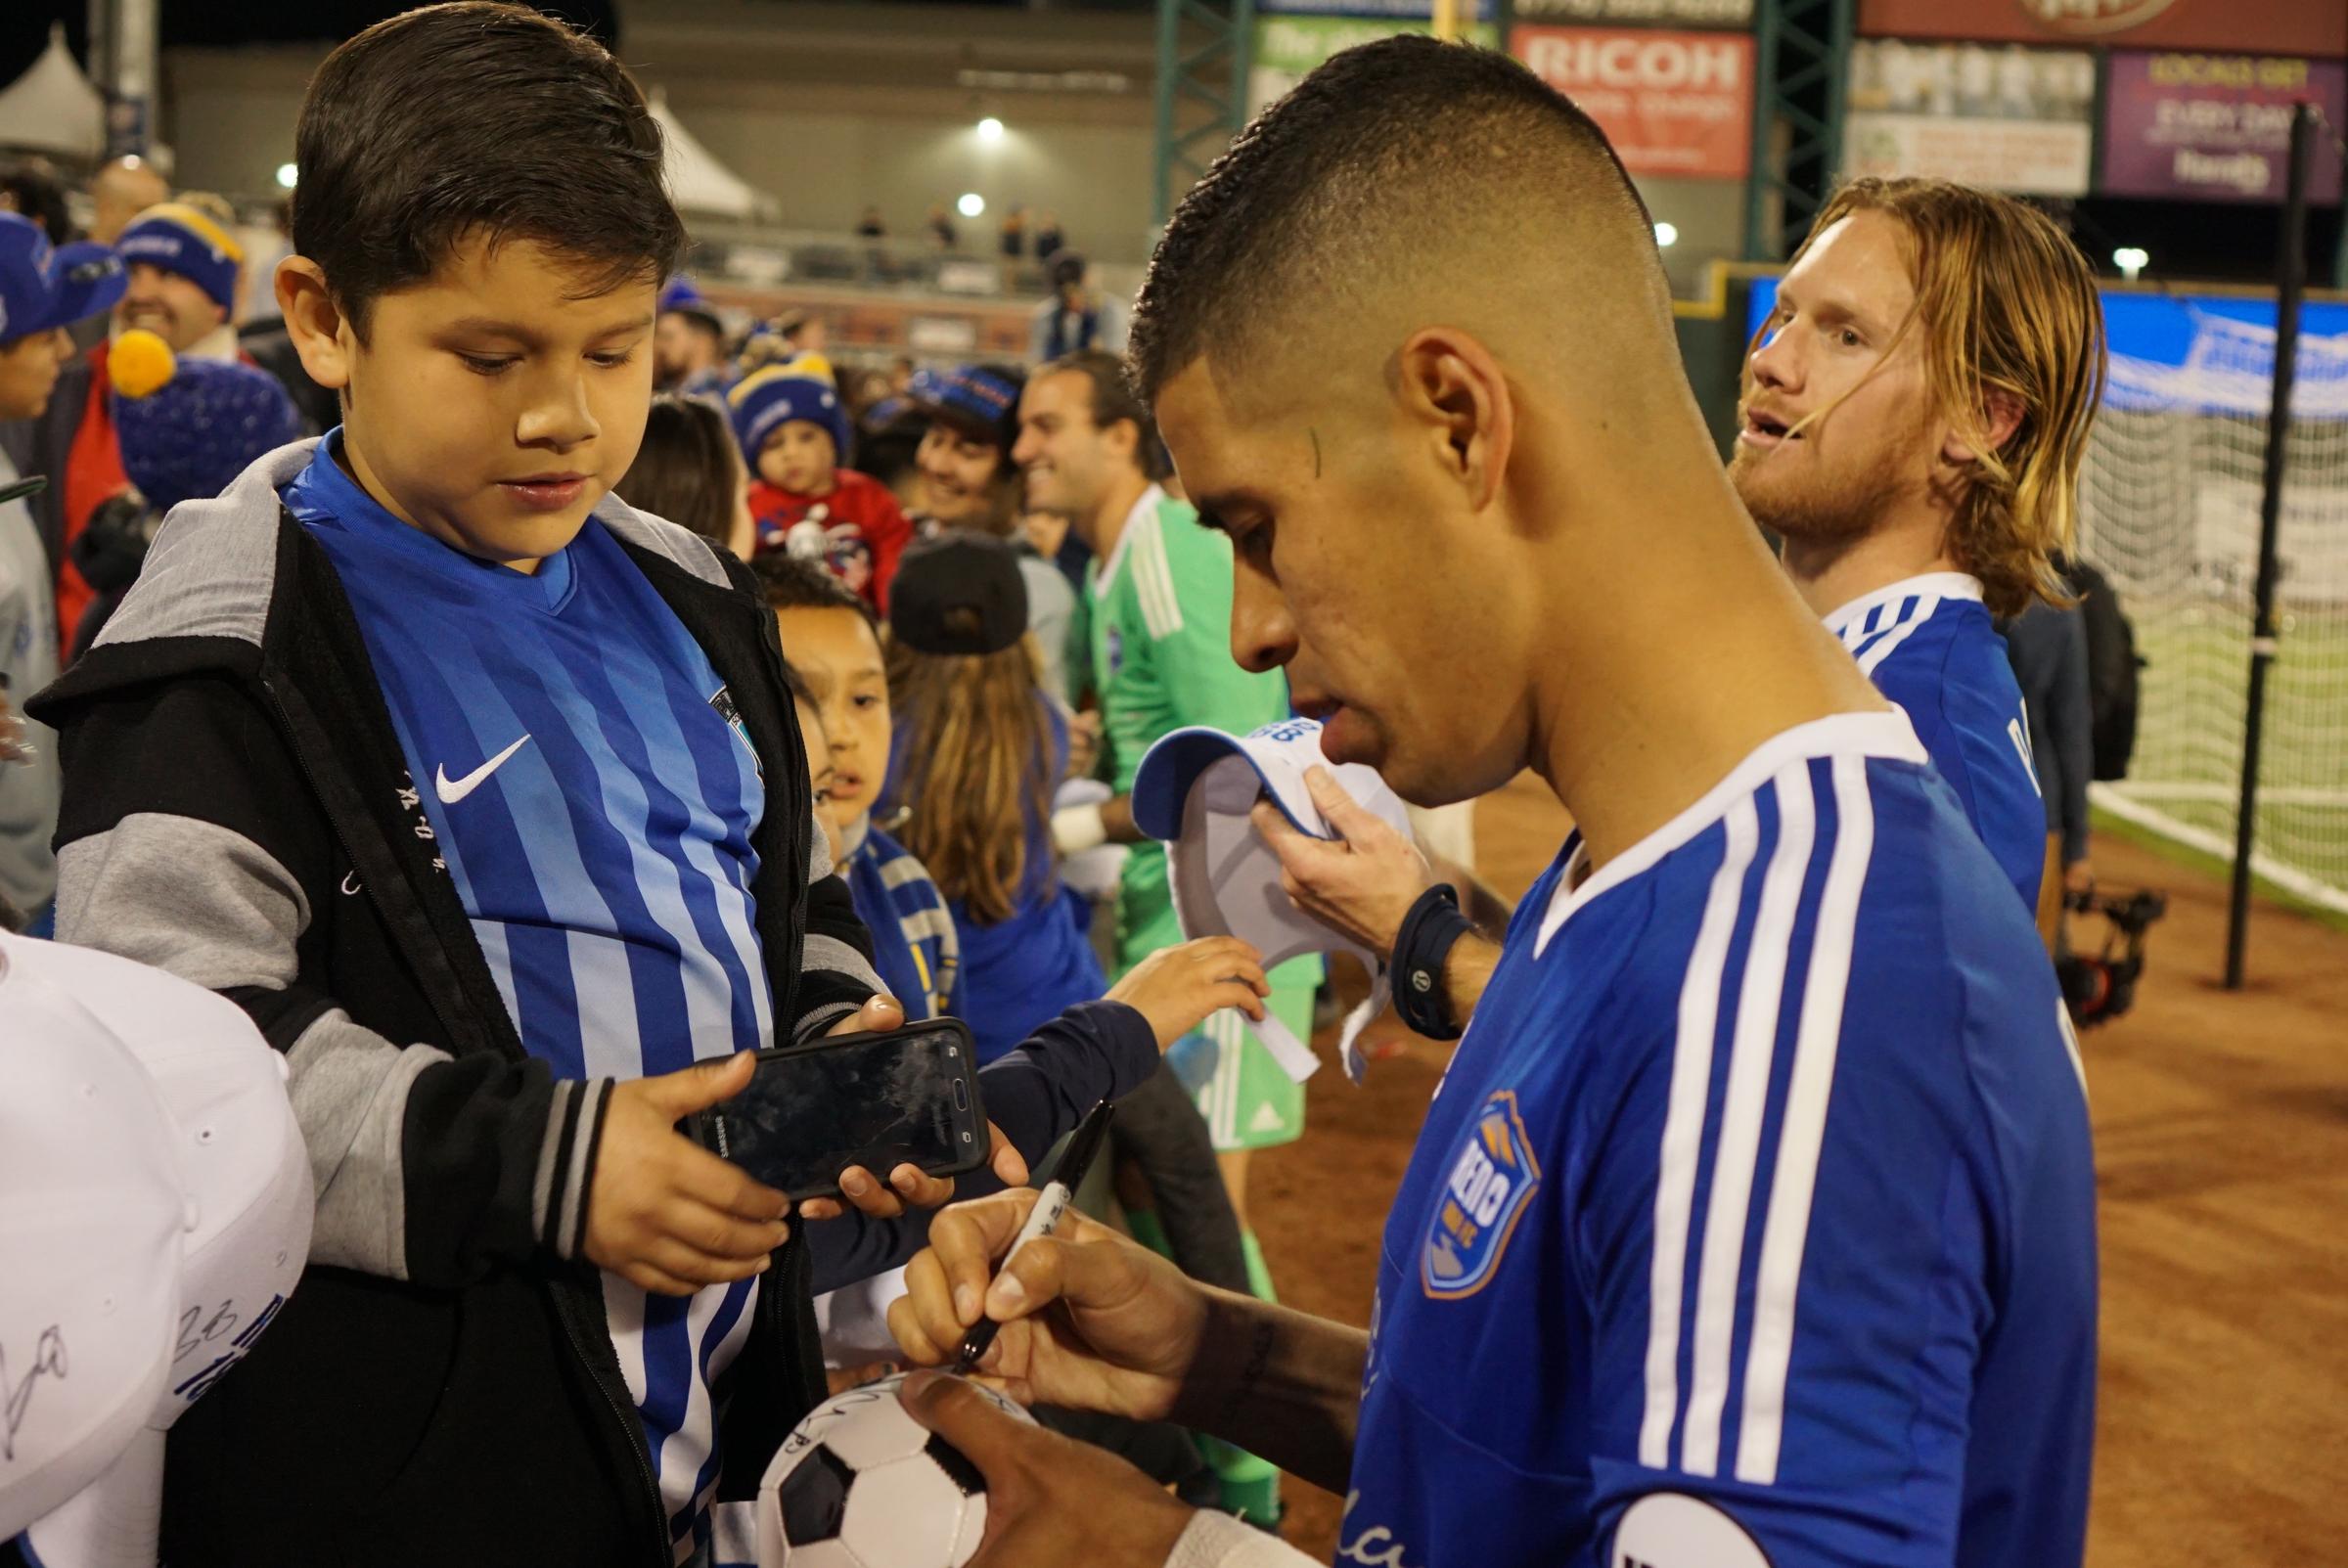 Junior Burgos signs autographs at the end of the game. Fans are willing to get anything signed from Burgos, including T-shirts and mini soccer balls.